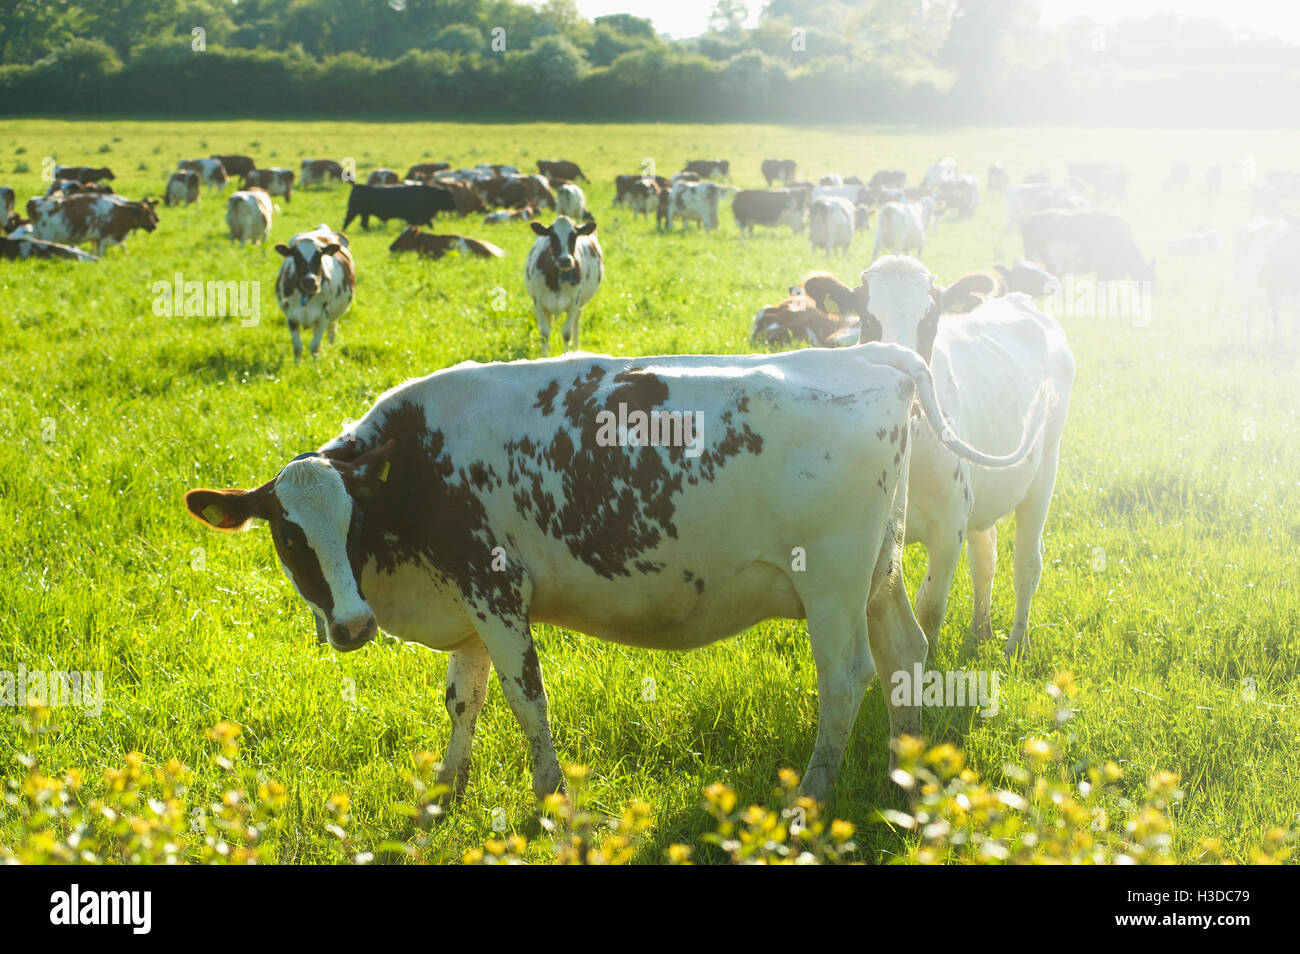 A herd of cows grazing in a field. Stock Photo